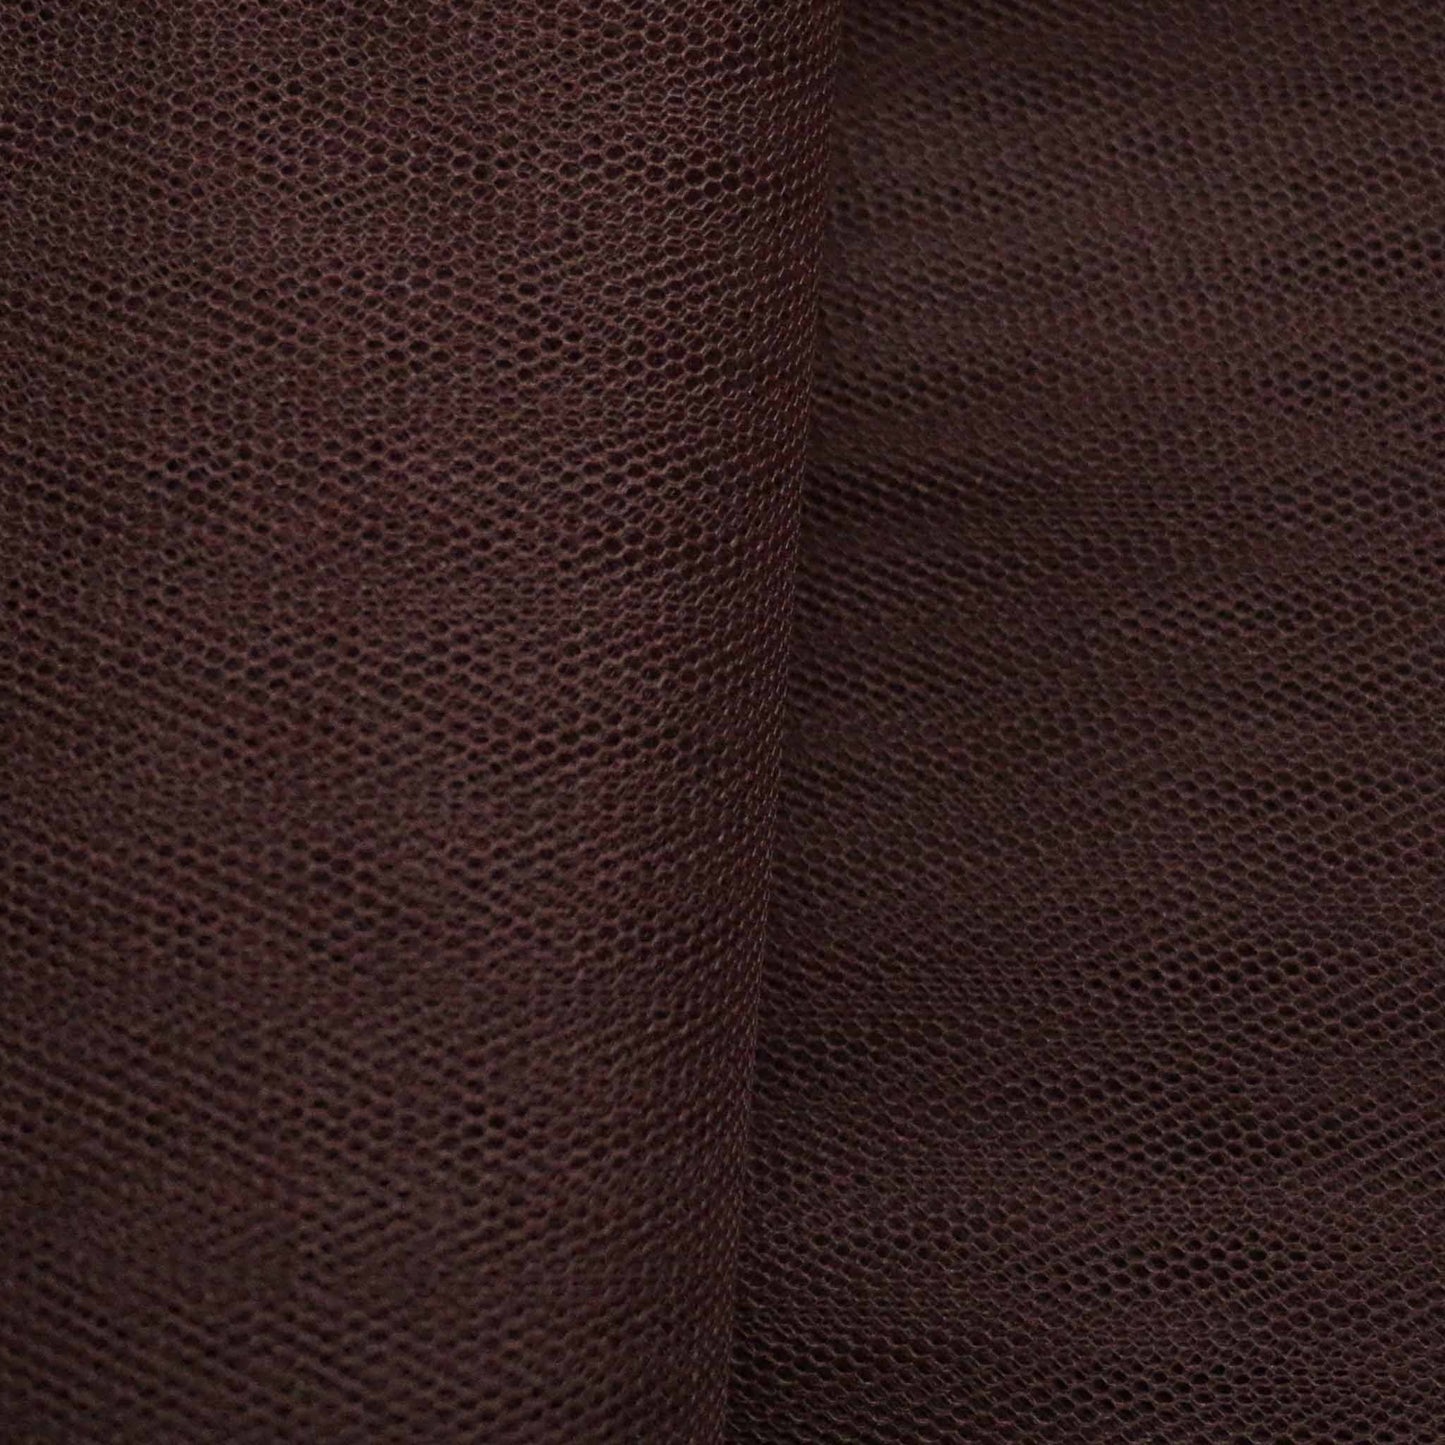 brown dress netting tulle fabric